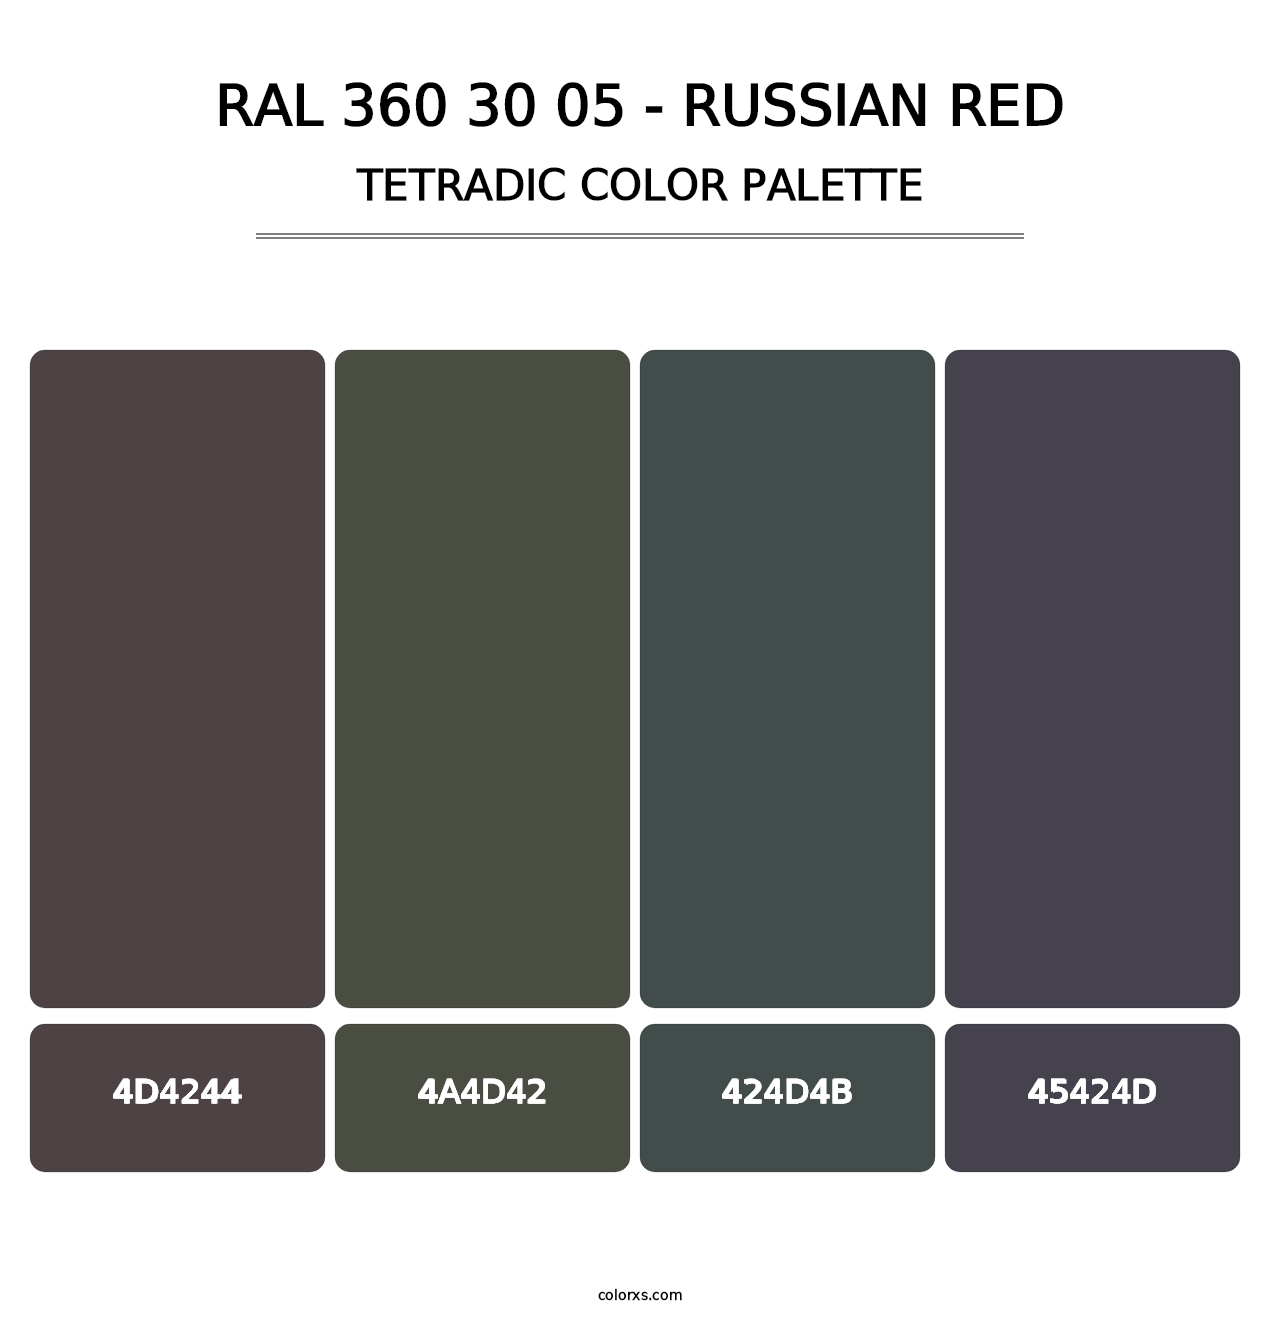 RAL 360 30 05 - Russian Red - Tetradic Color Palette